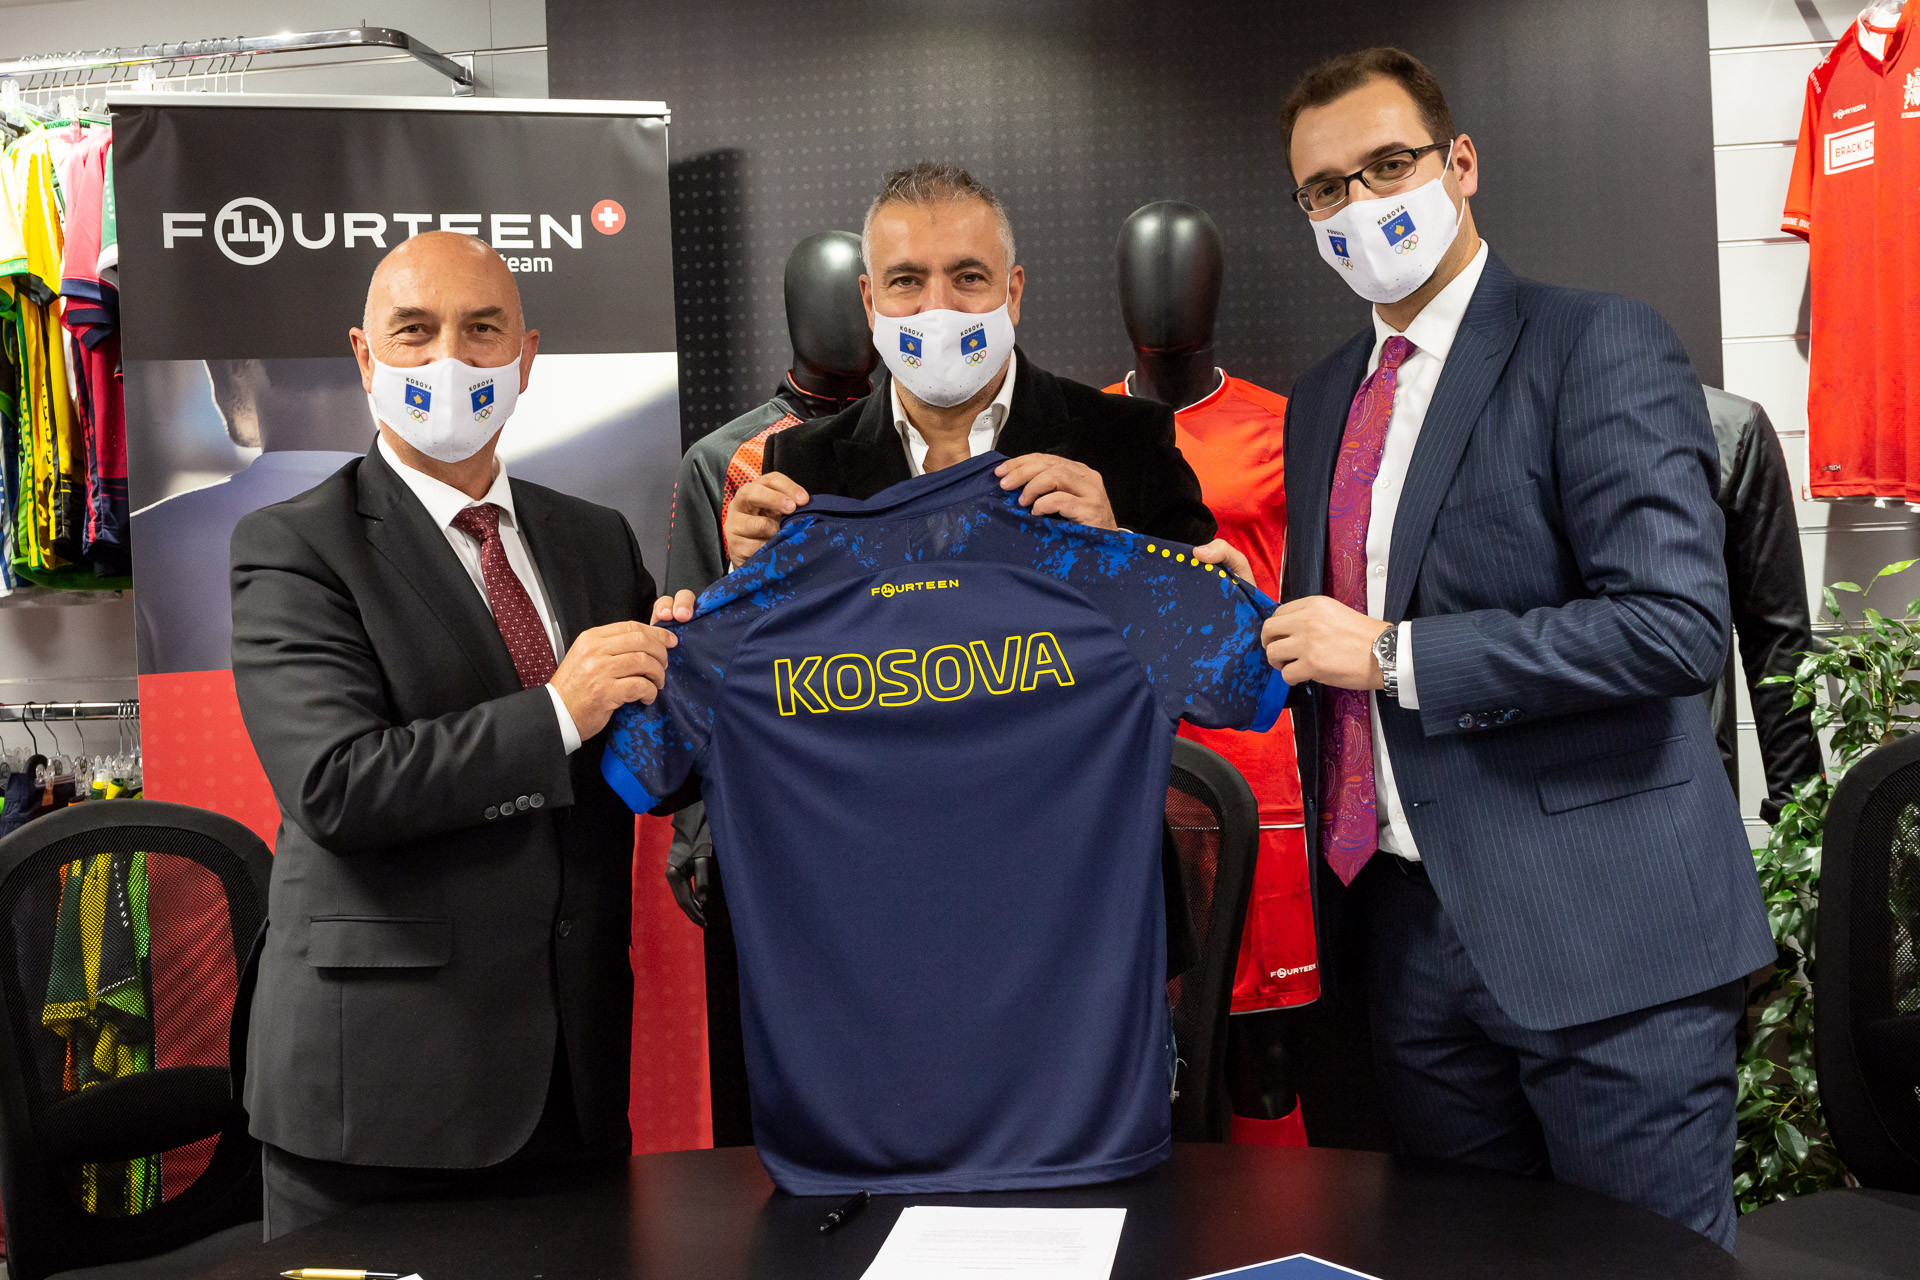 Olympic Committee of Kosovo signs four-year apparel deal with Fourteen